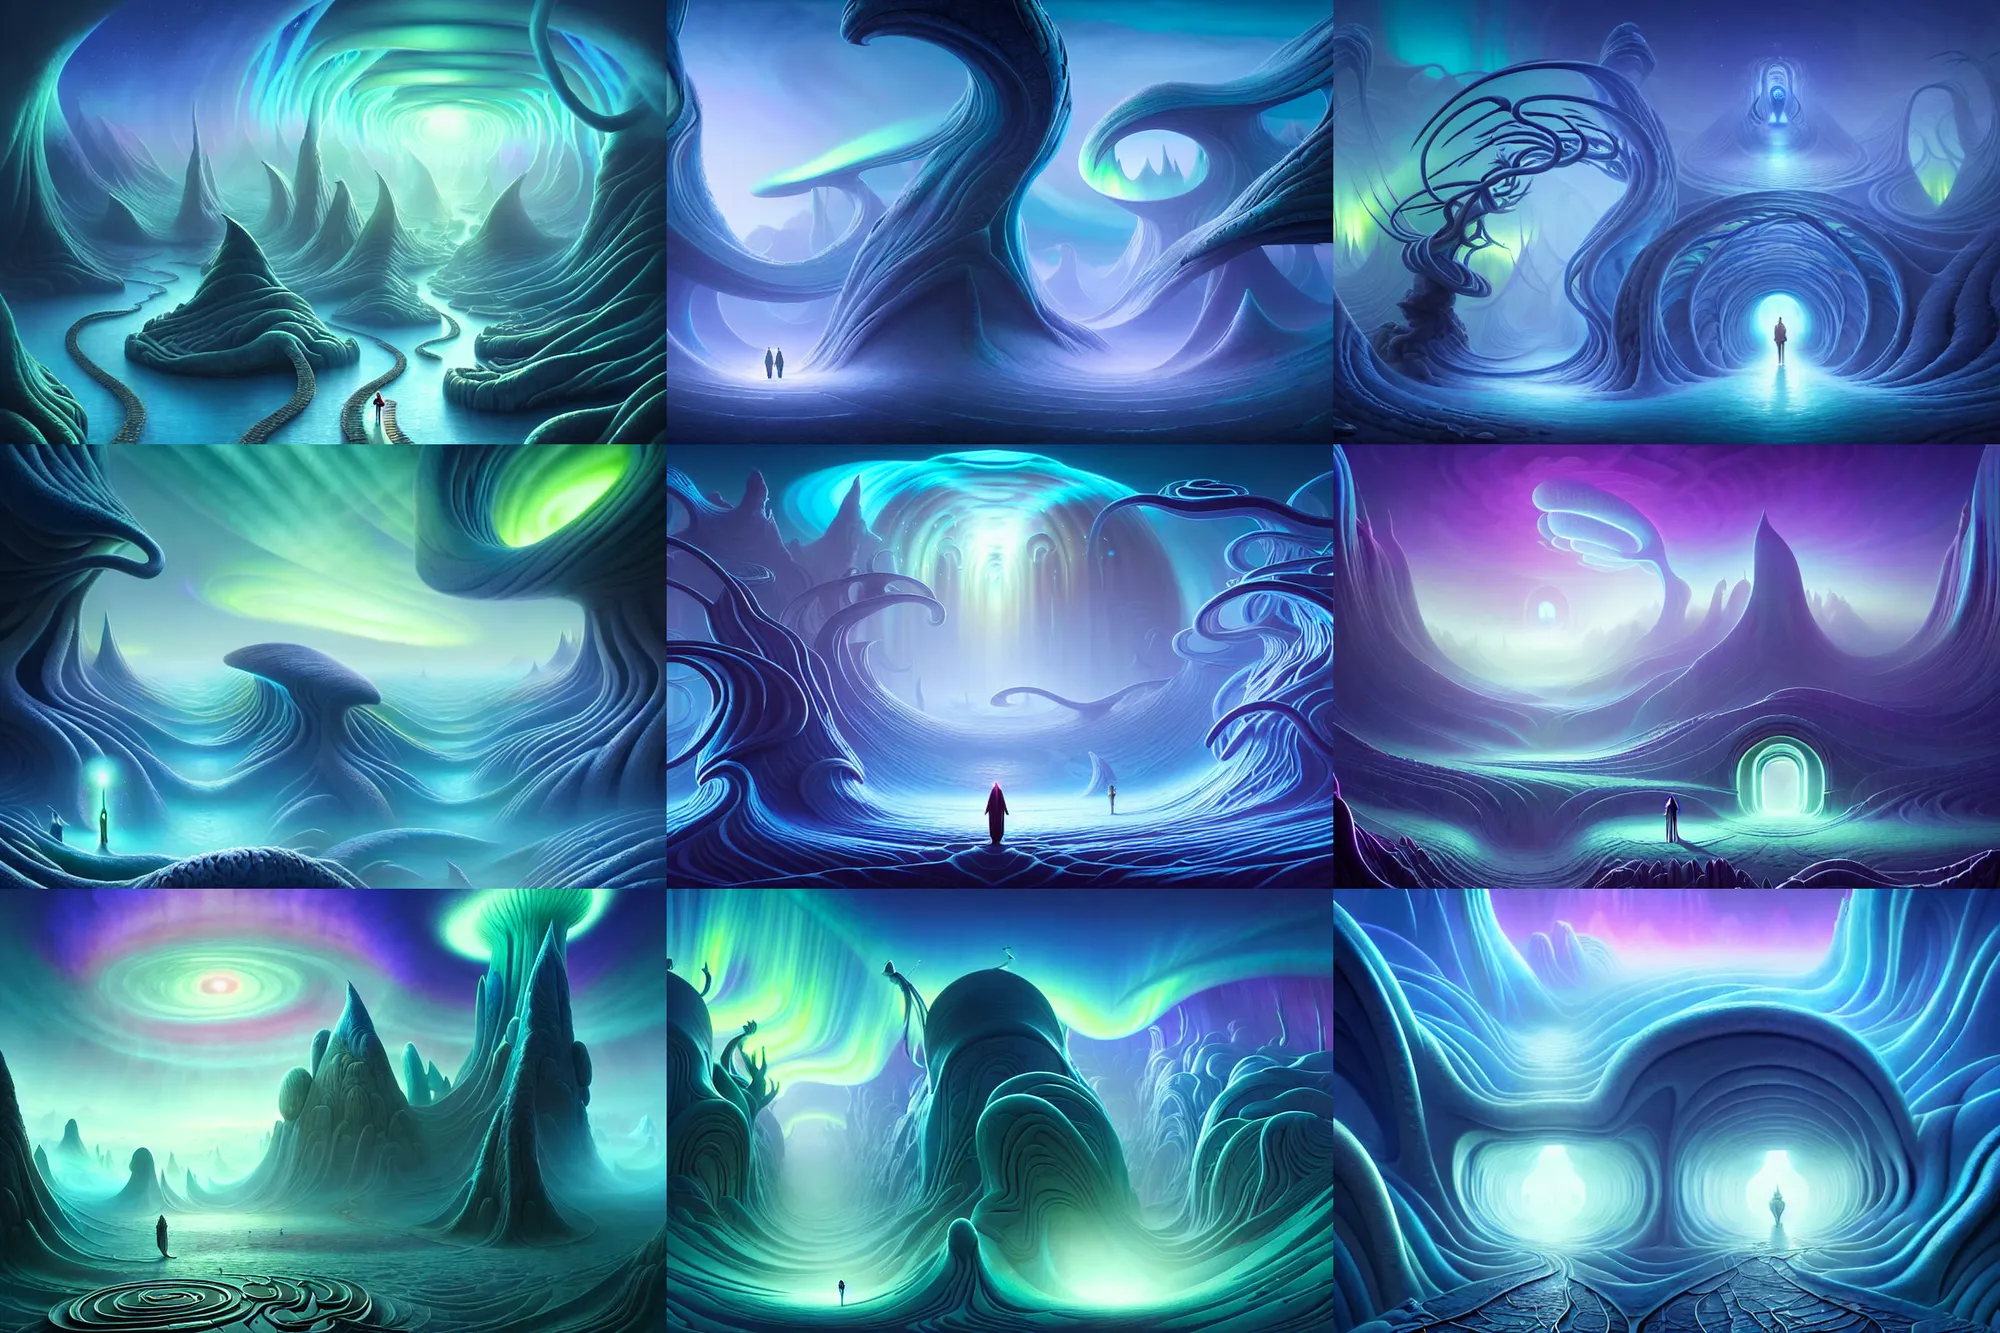 Prompt: an epic elite masterpiece mysterious sci - fi matte painting of a winding path through arctic dream worlds with surreal structures inspired by heironymous bosch's garden of earthly delights, surreal ice landscapes by asher durand and cyril rolando and natalie shau and thomas kinkade, insanely detailed and intricate, elegant, northern lights, synthwave, ethereal aurora spirits